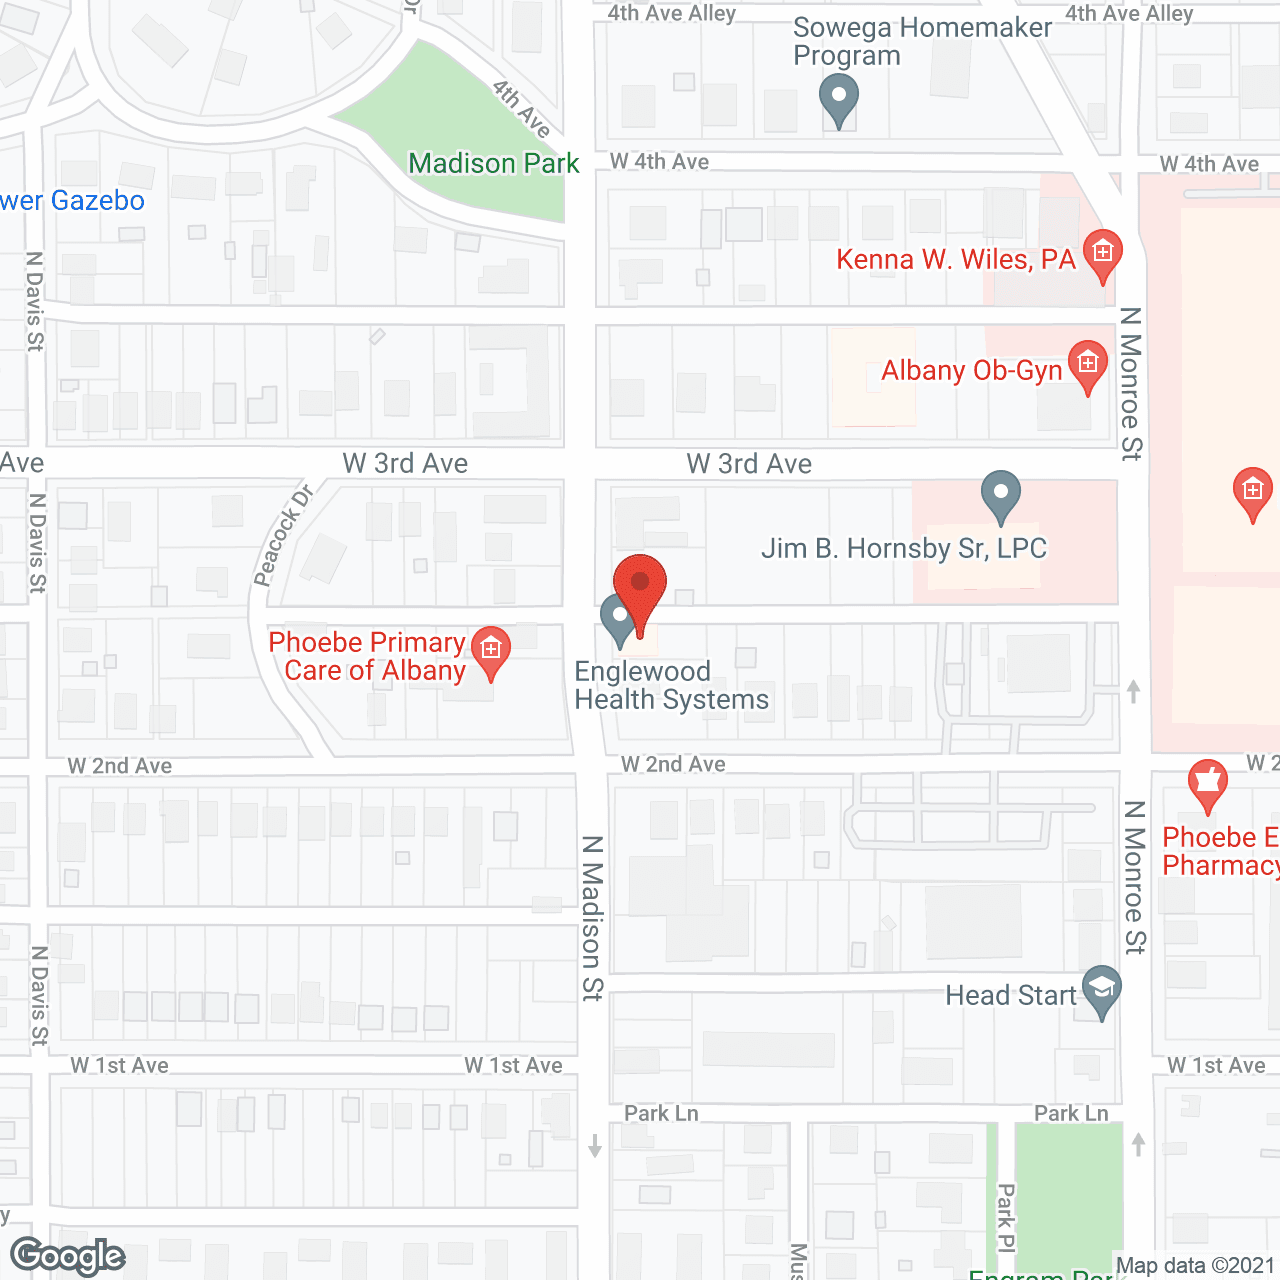 Englewood Health Care Ctr in google map